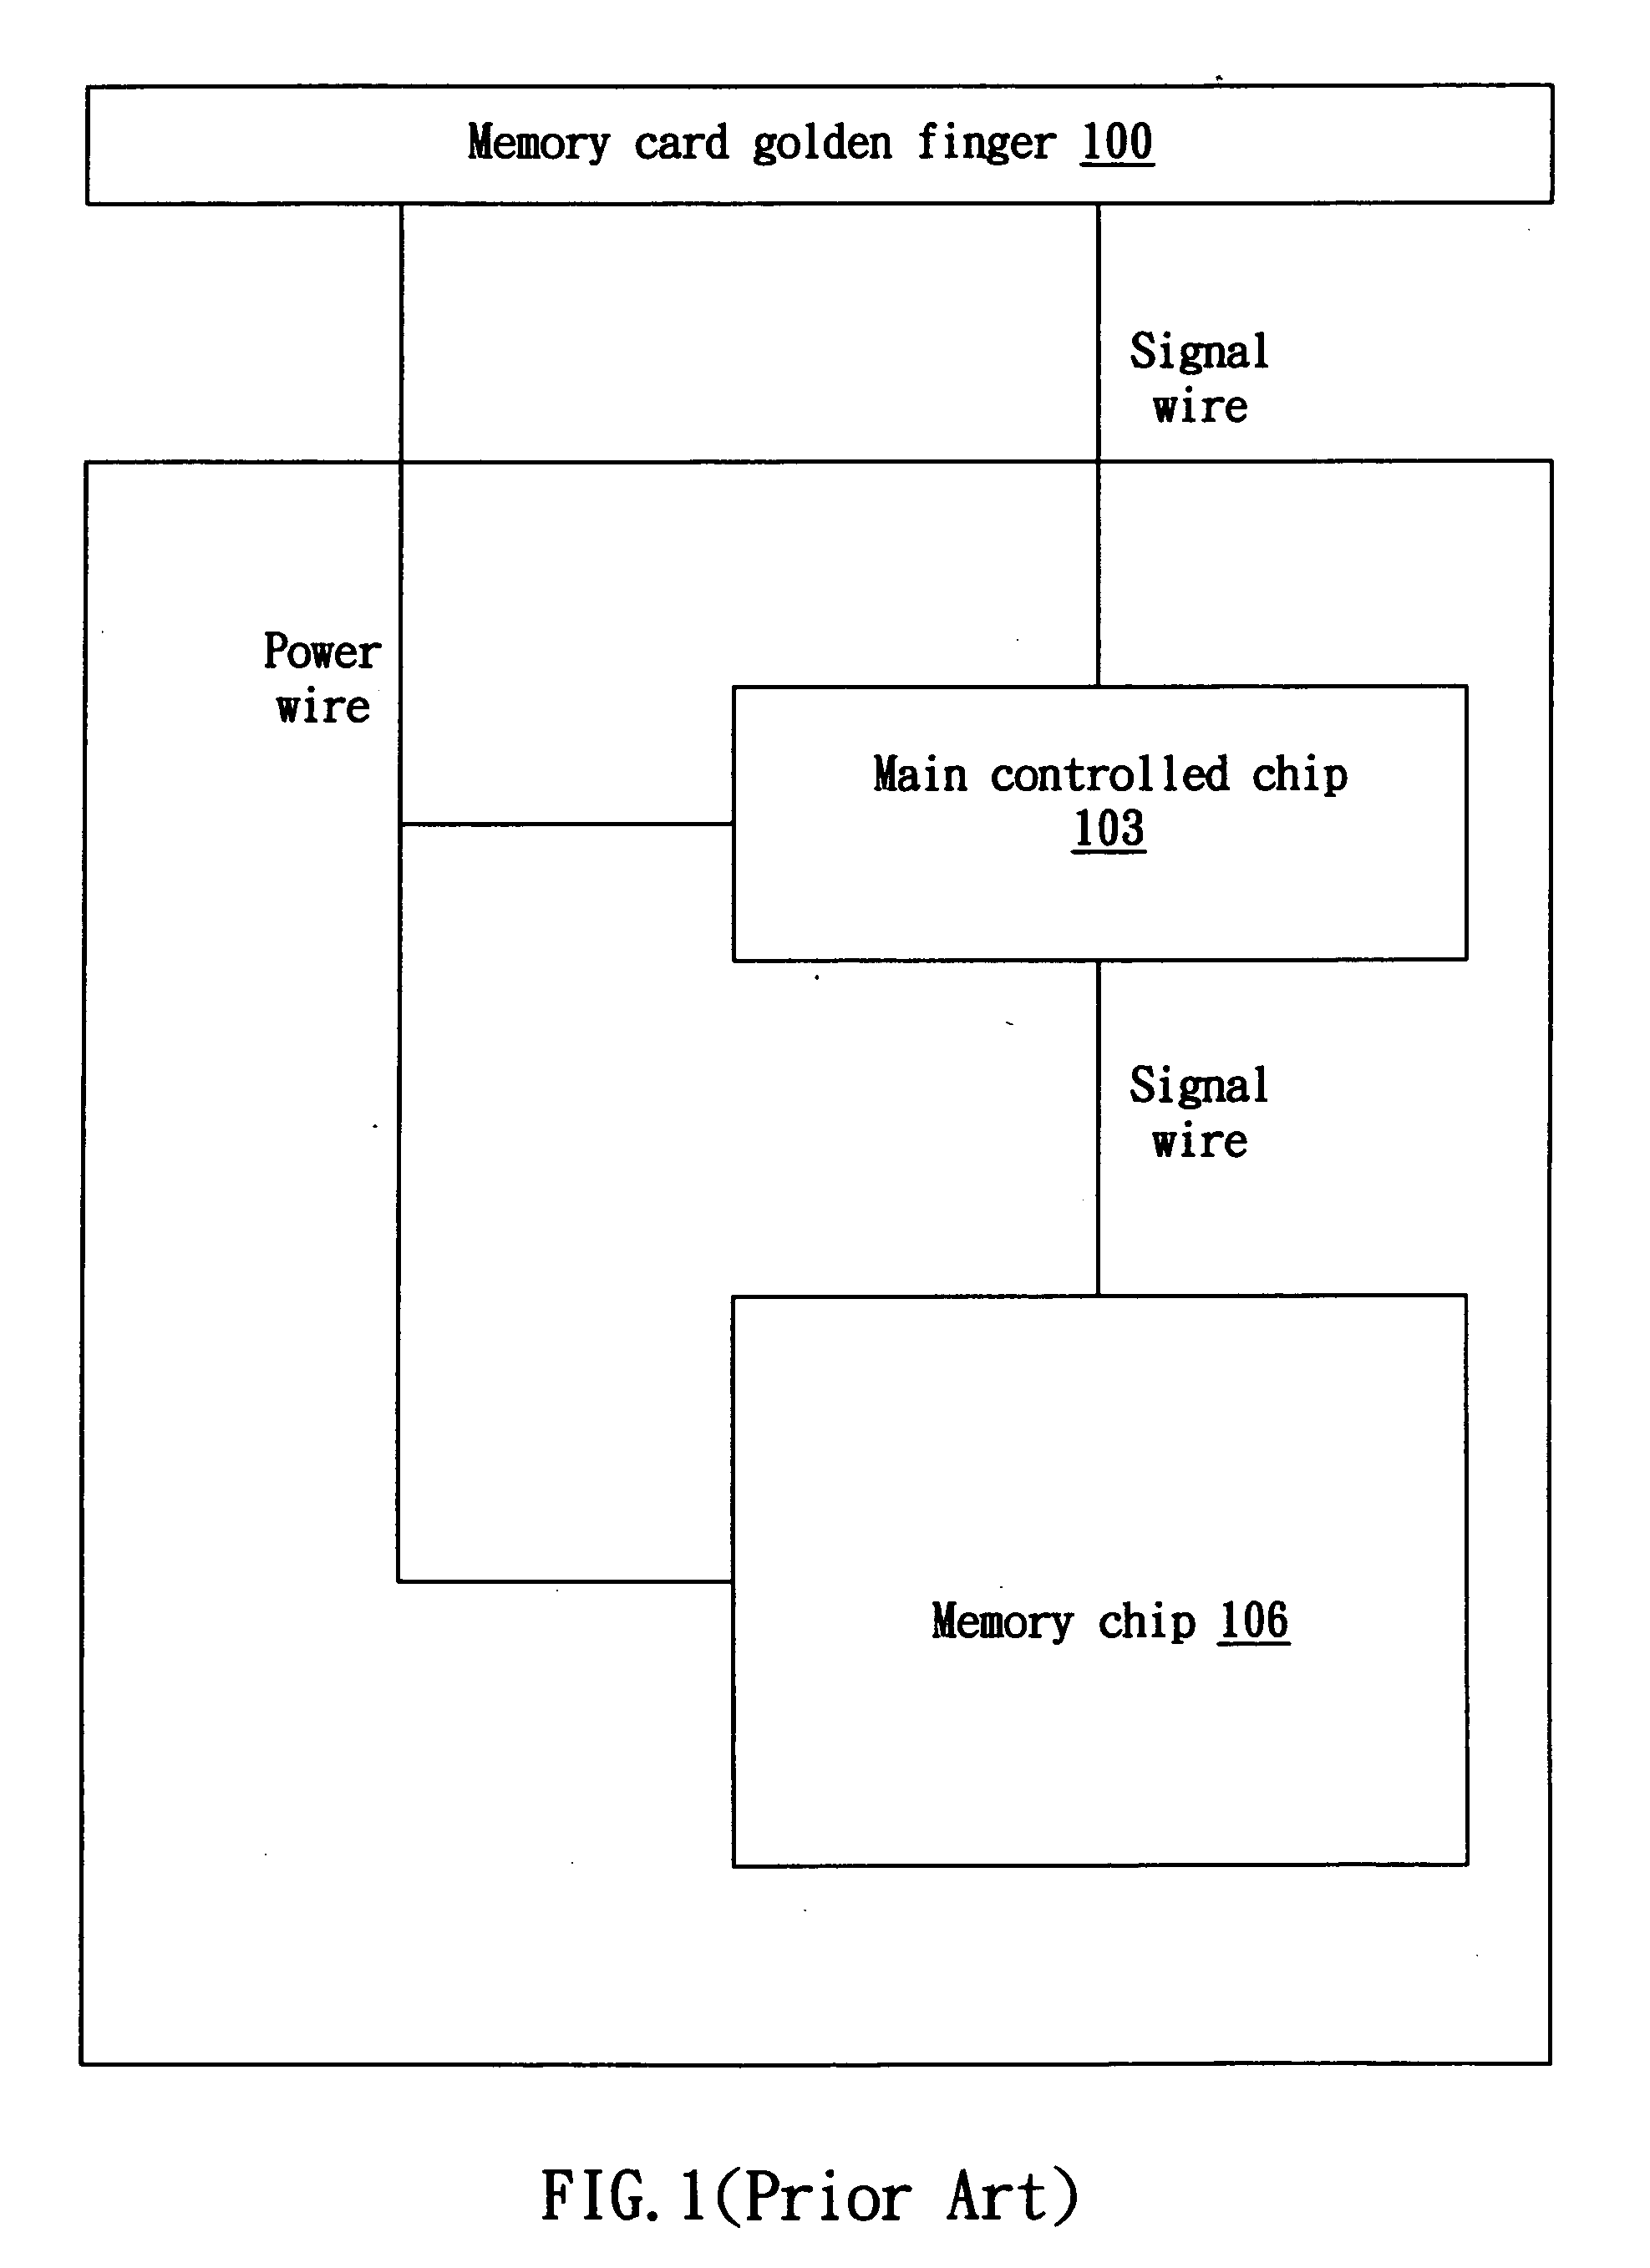 System for converting input voltage in memory card